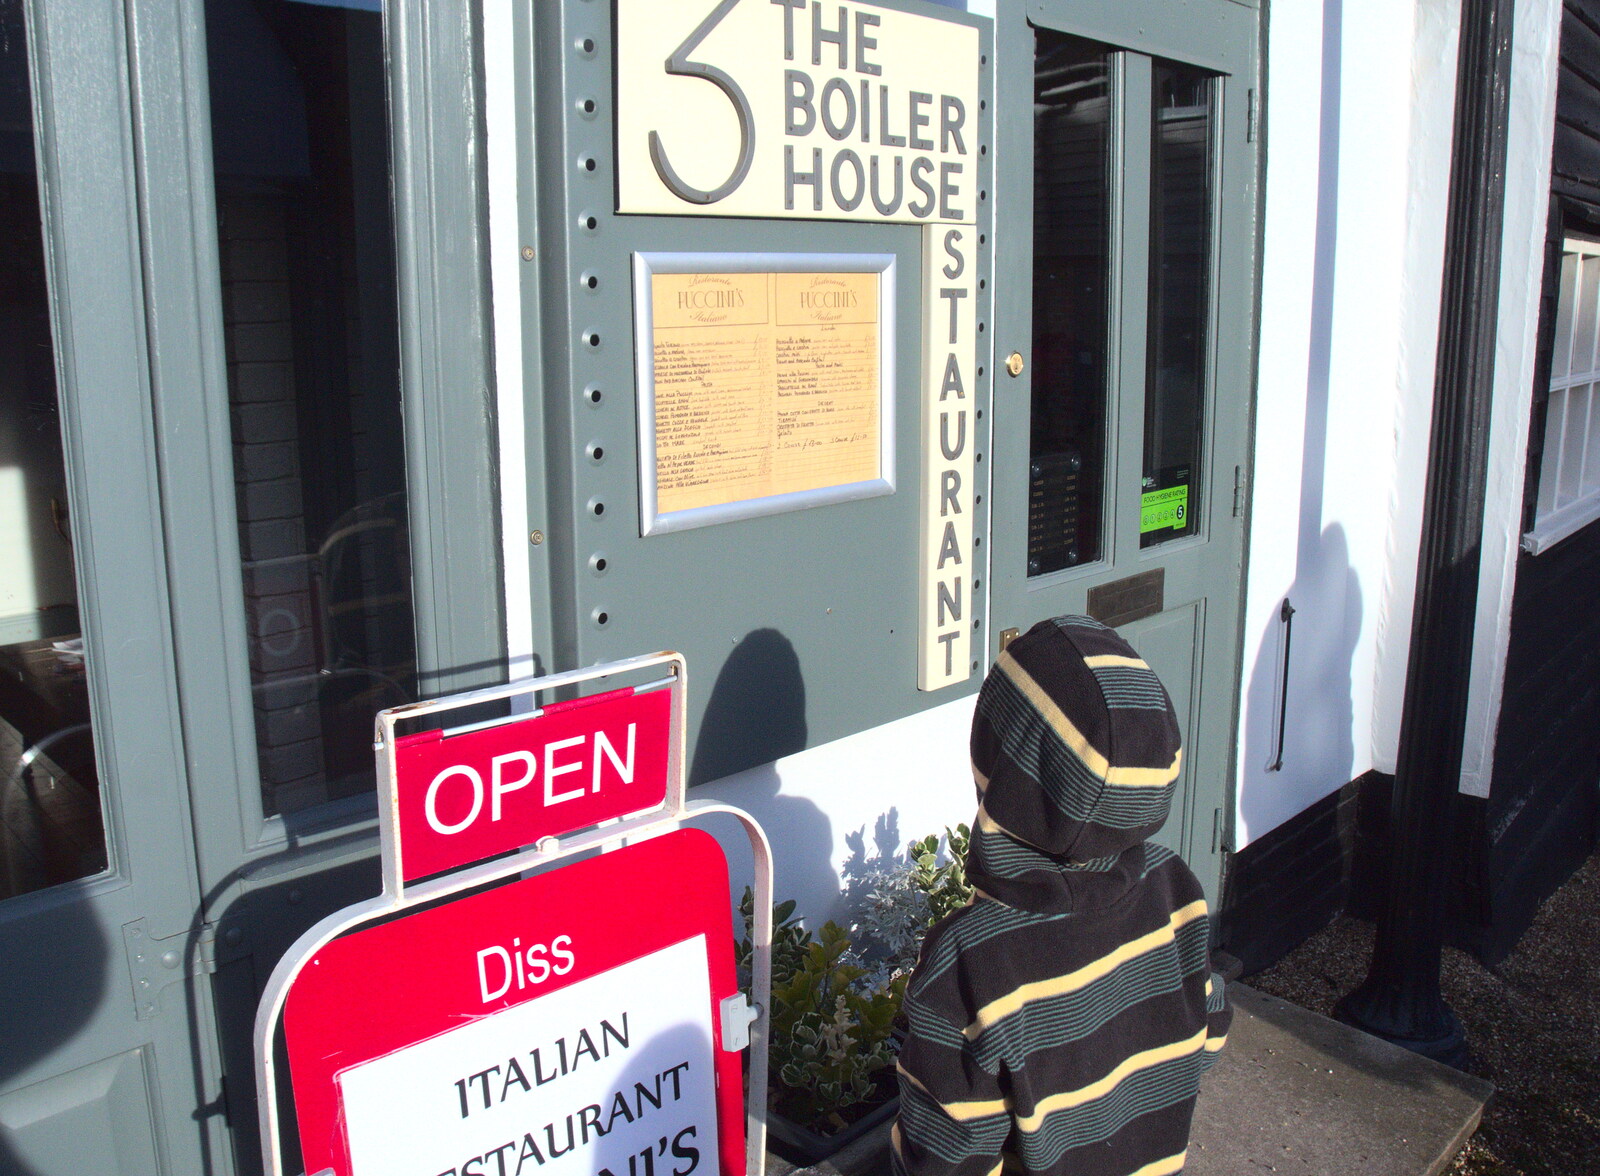 Fred looks at the Boiler House sign in Diss from Reindeer Two Ways, Paddington and Suffolk - 19th December 2017